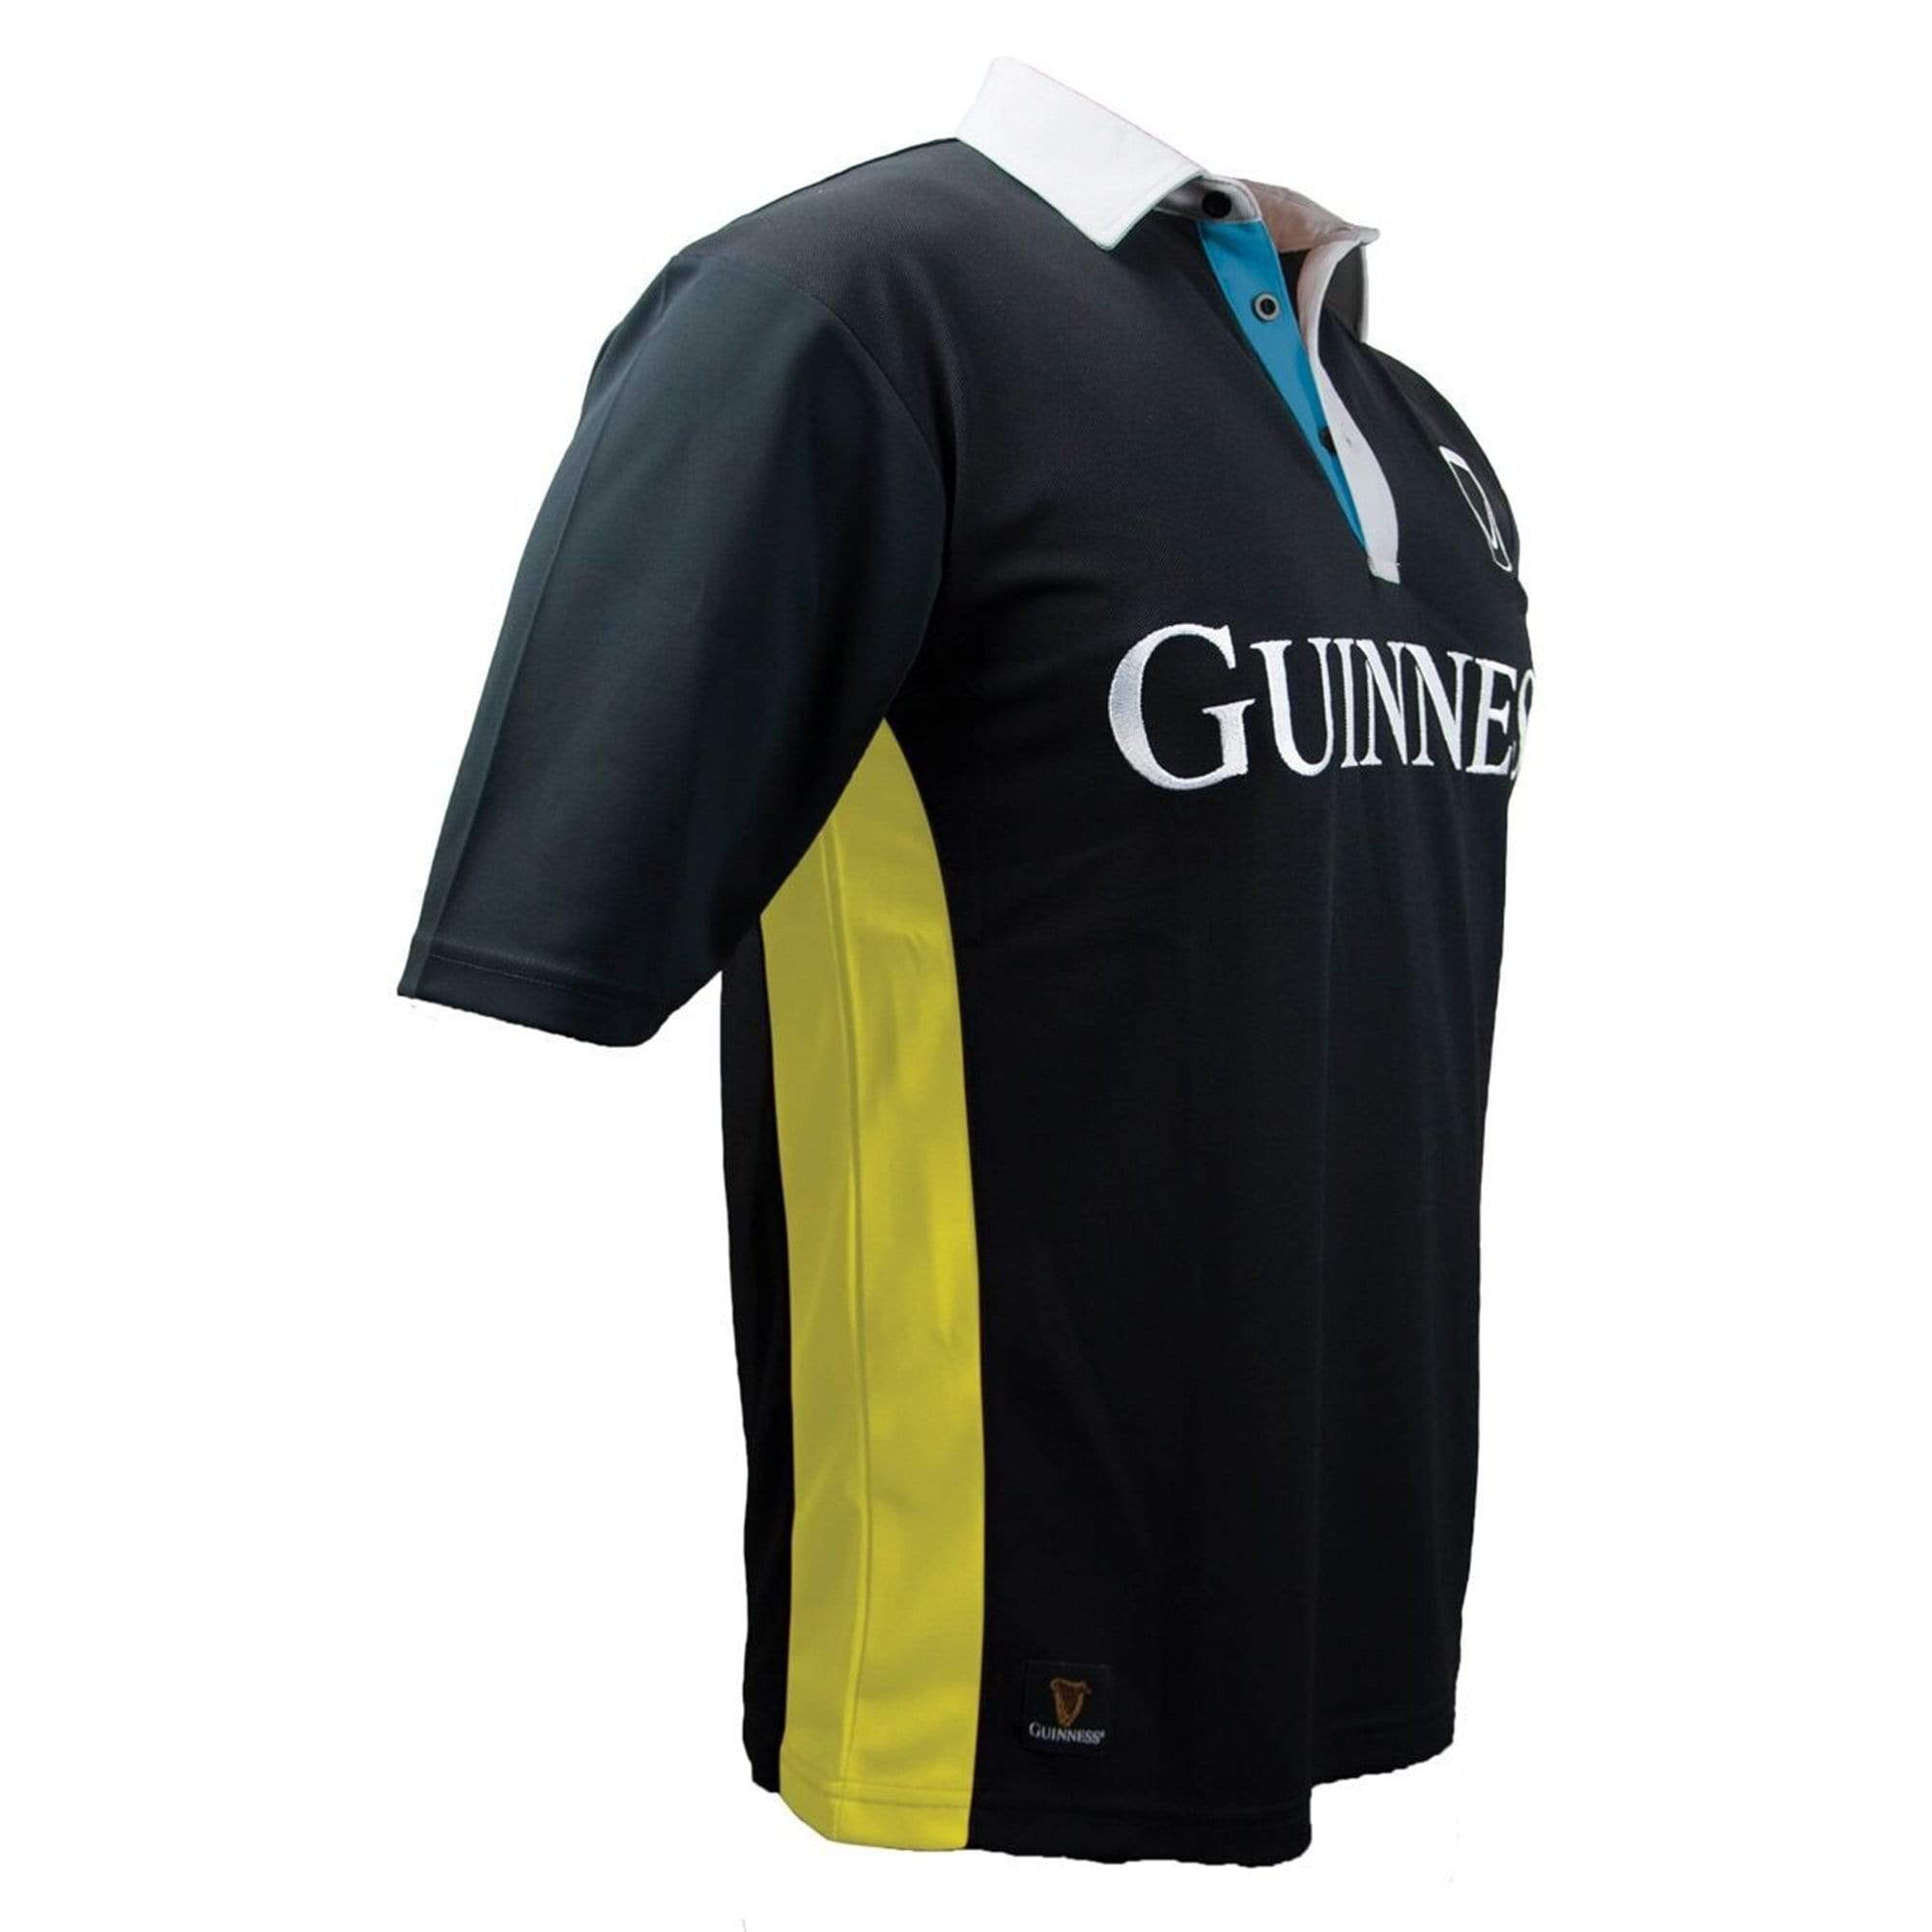 Guinness Toucan Black, Green and White Hockey Jersey, Large